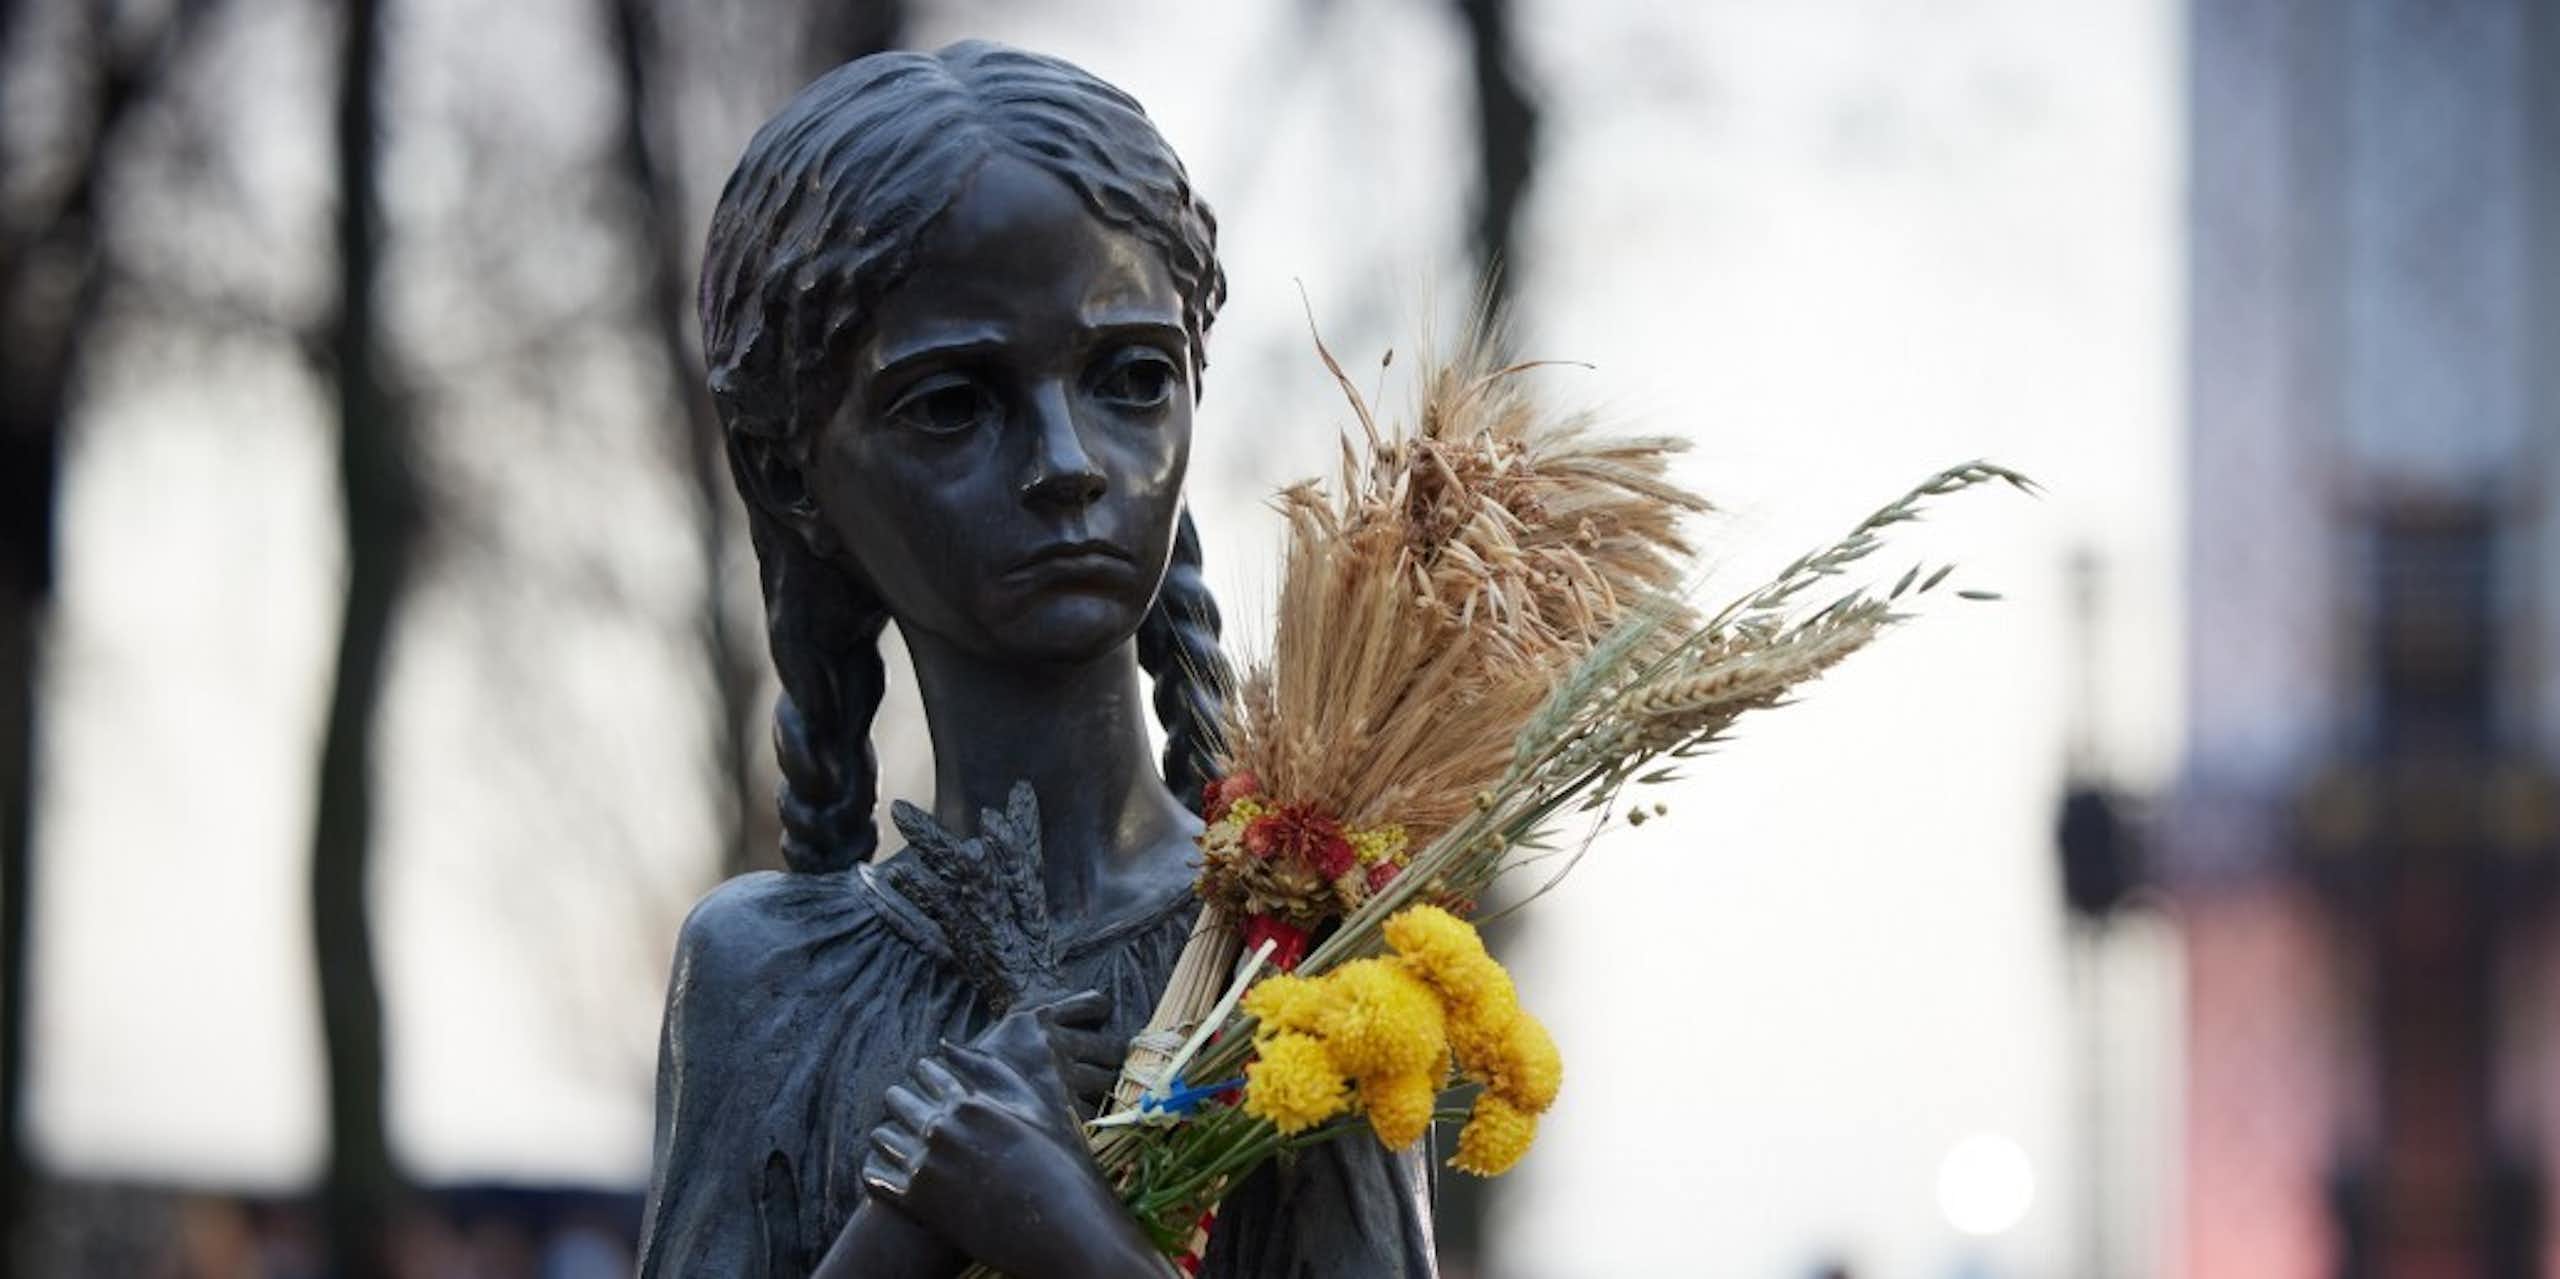 A statue of a girl during the Ukrainian famine, in which someone has placed wheat and flowers.